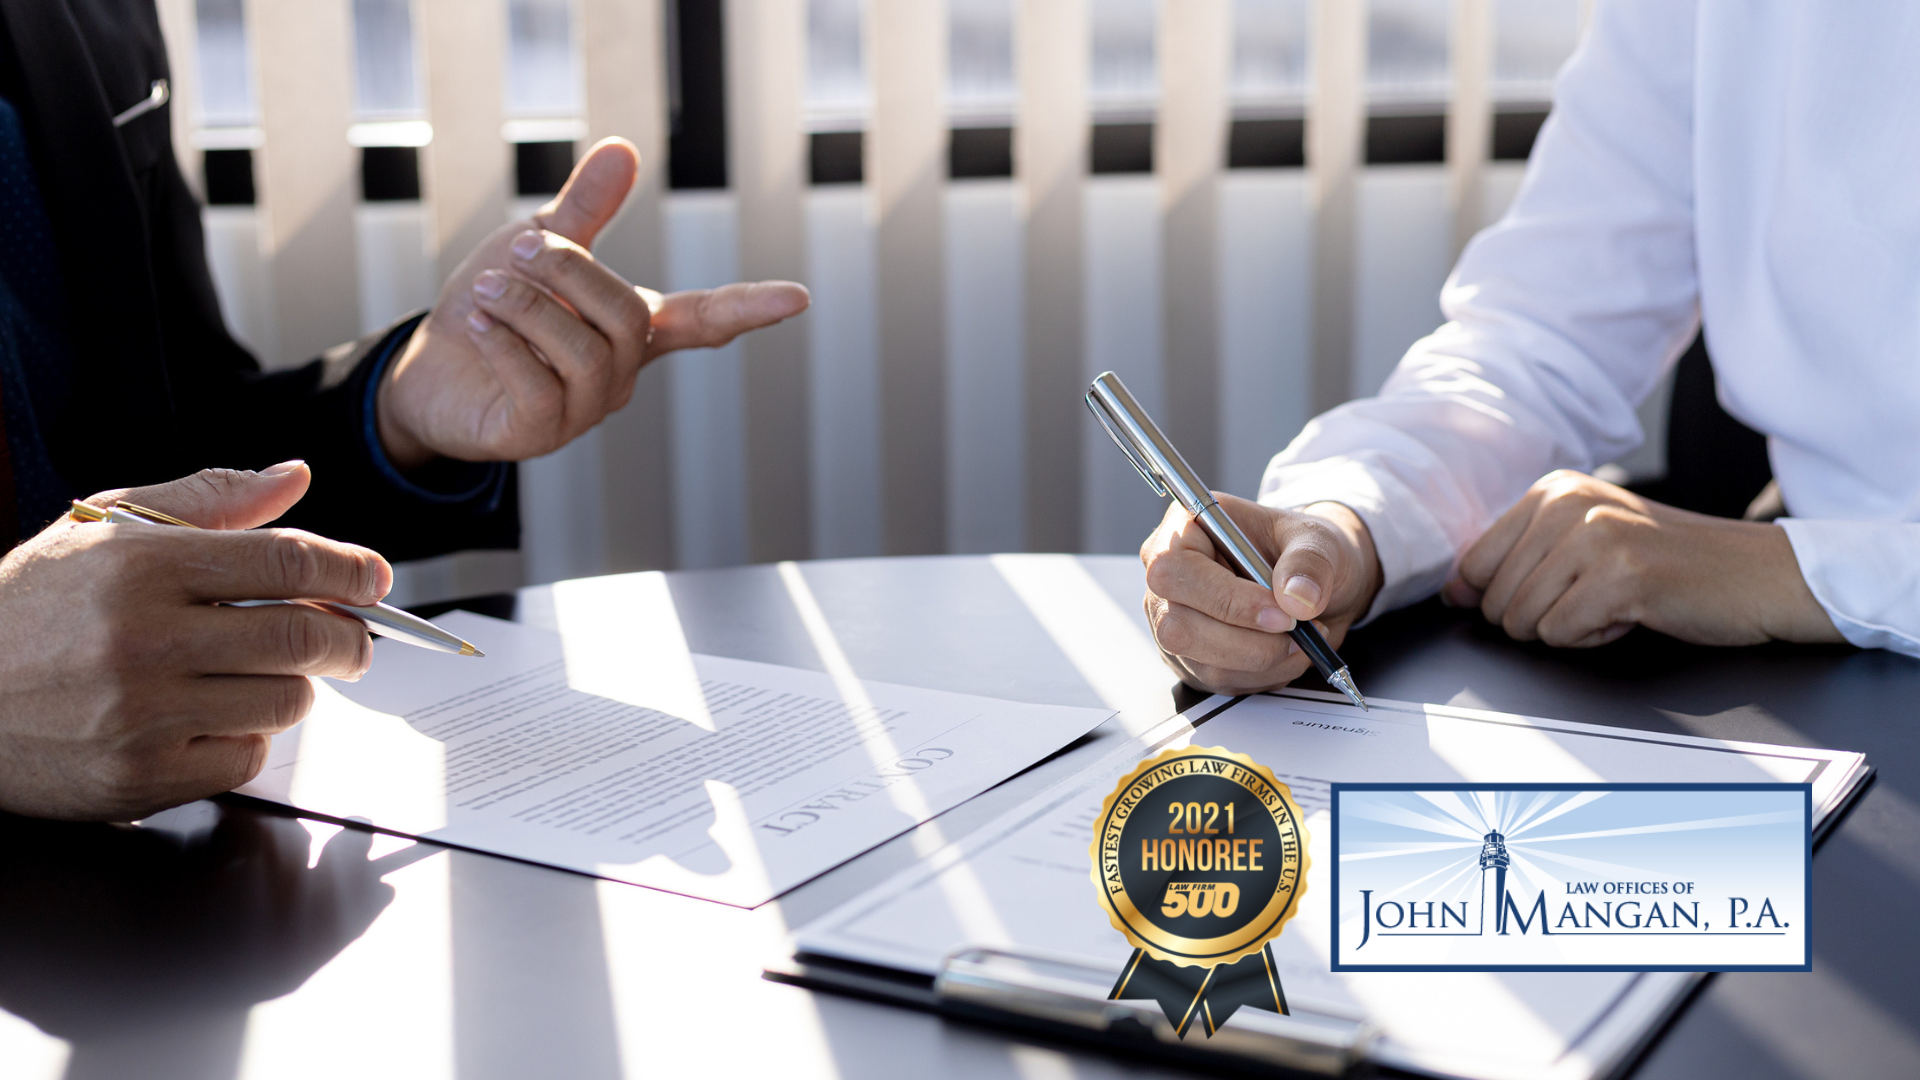 Florida estate plan documents drafted by an attorney who is Certified in Trusts, Wills, and Estates by the Florida Bar is your assurance that the most important people in your life and your business will be the beneficiaries of your estate.